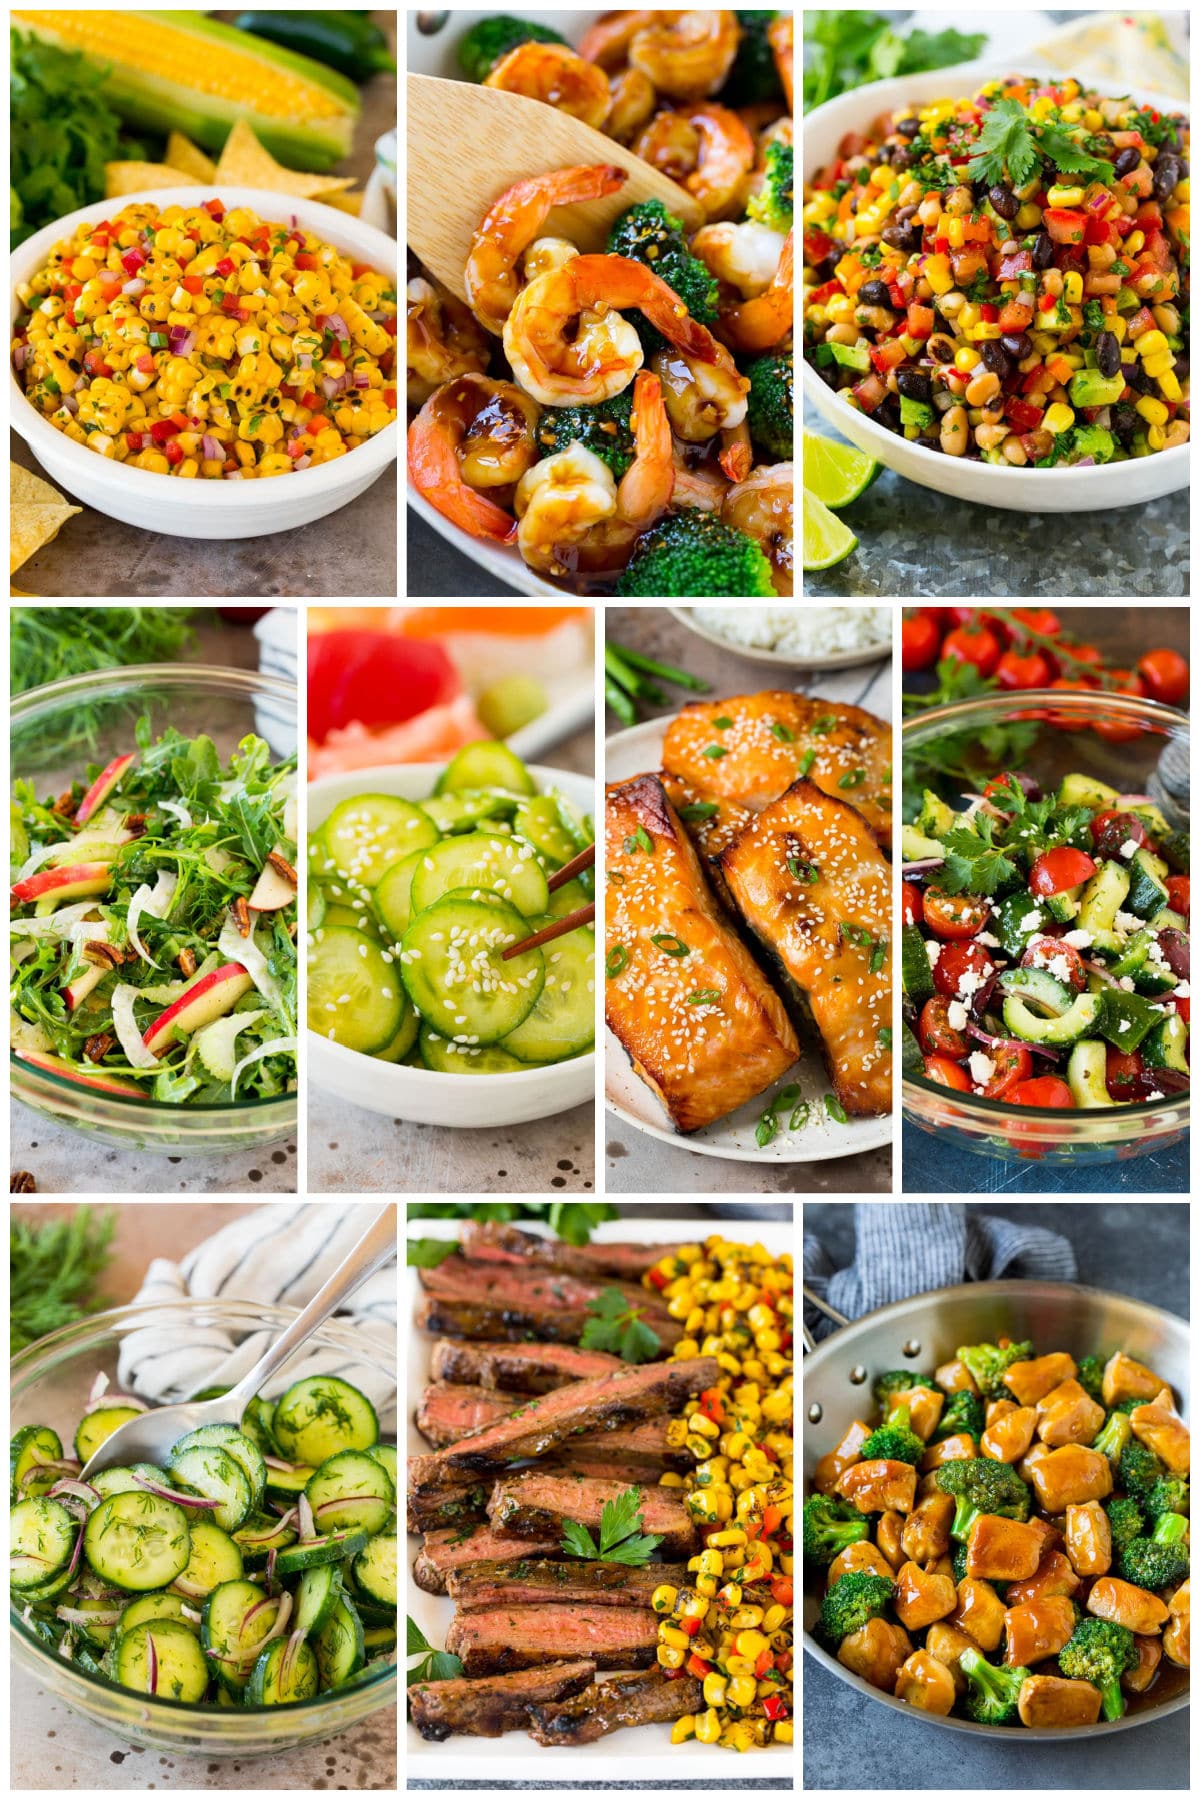 A group of lighter dishes like corn salsa, Mediterranean salad and cucumber dill salad.